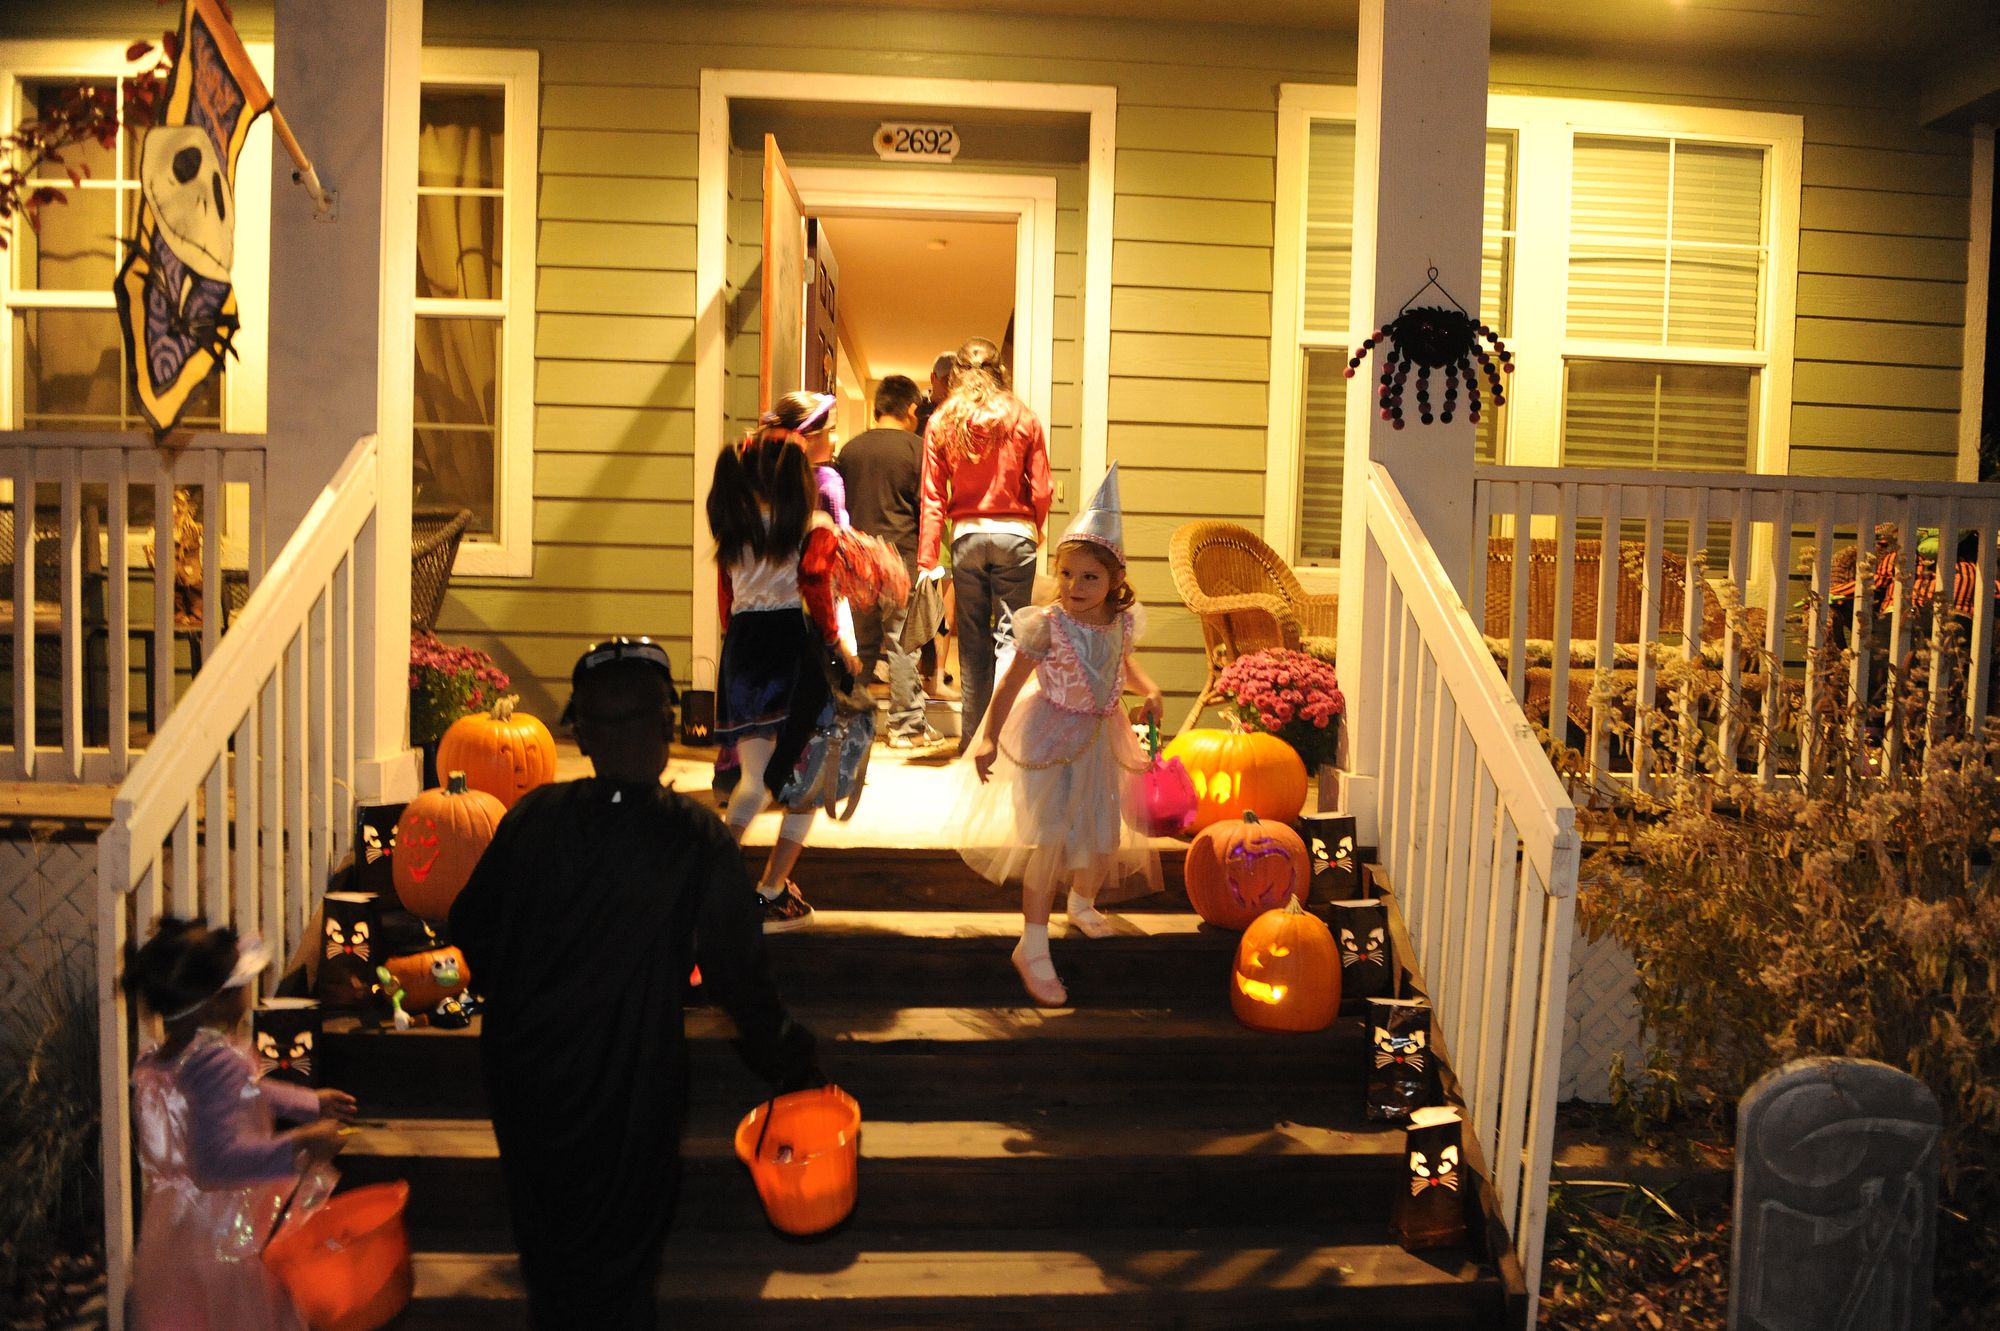 The Craziest Things Kids Have Gotten While Trick-Or-Treating - Delish.com